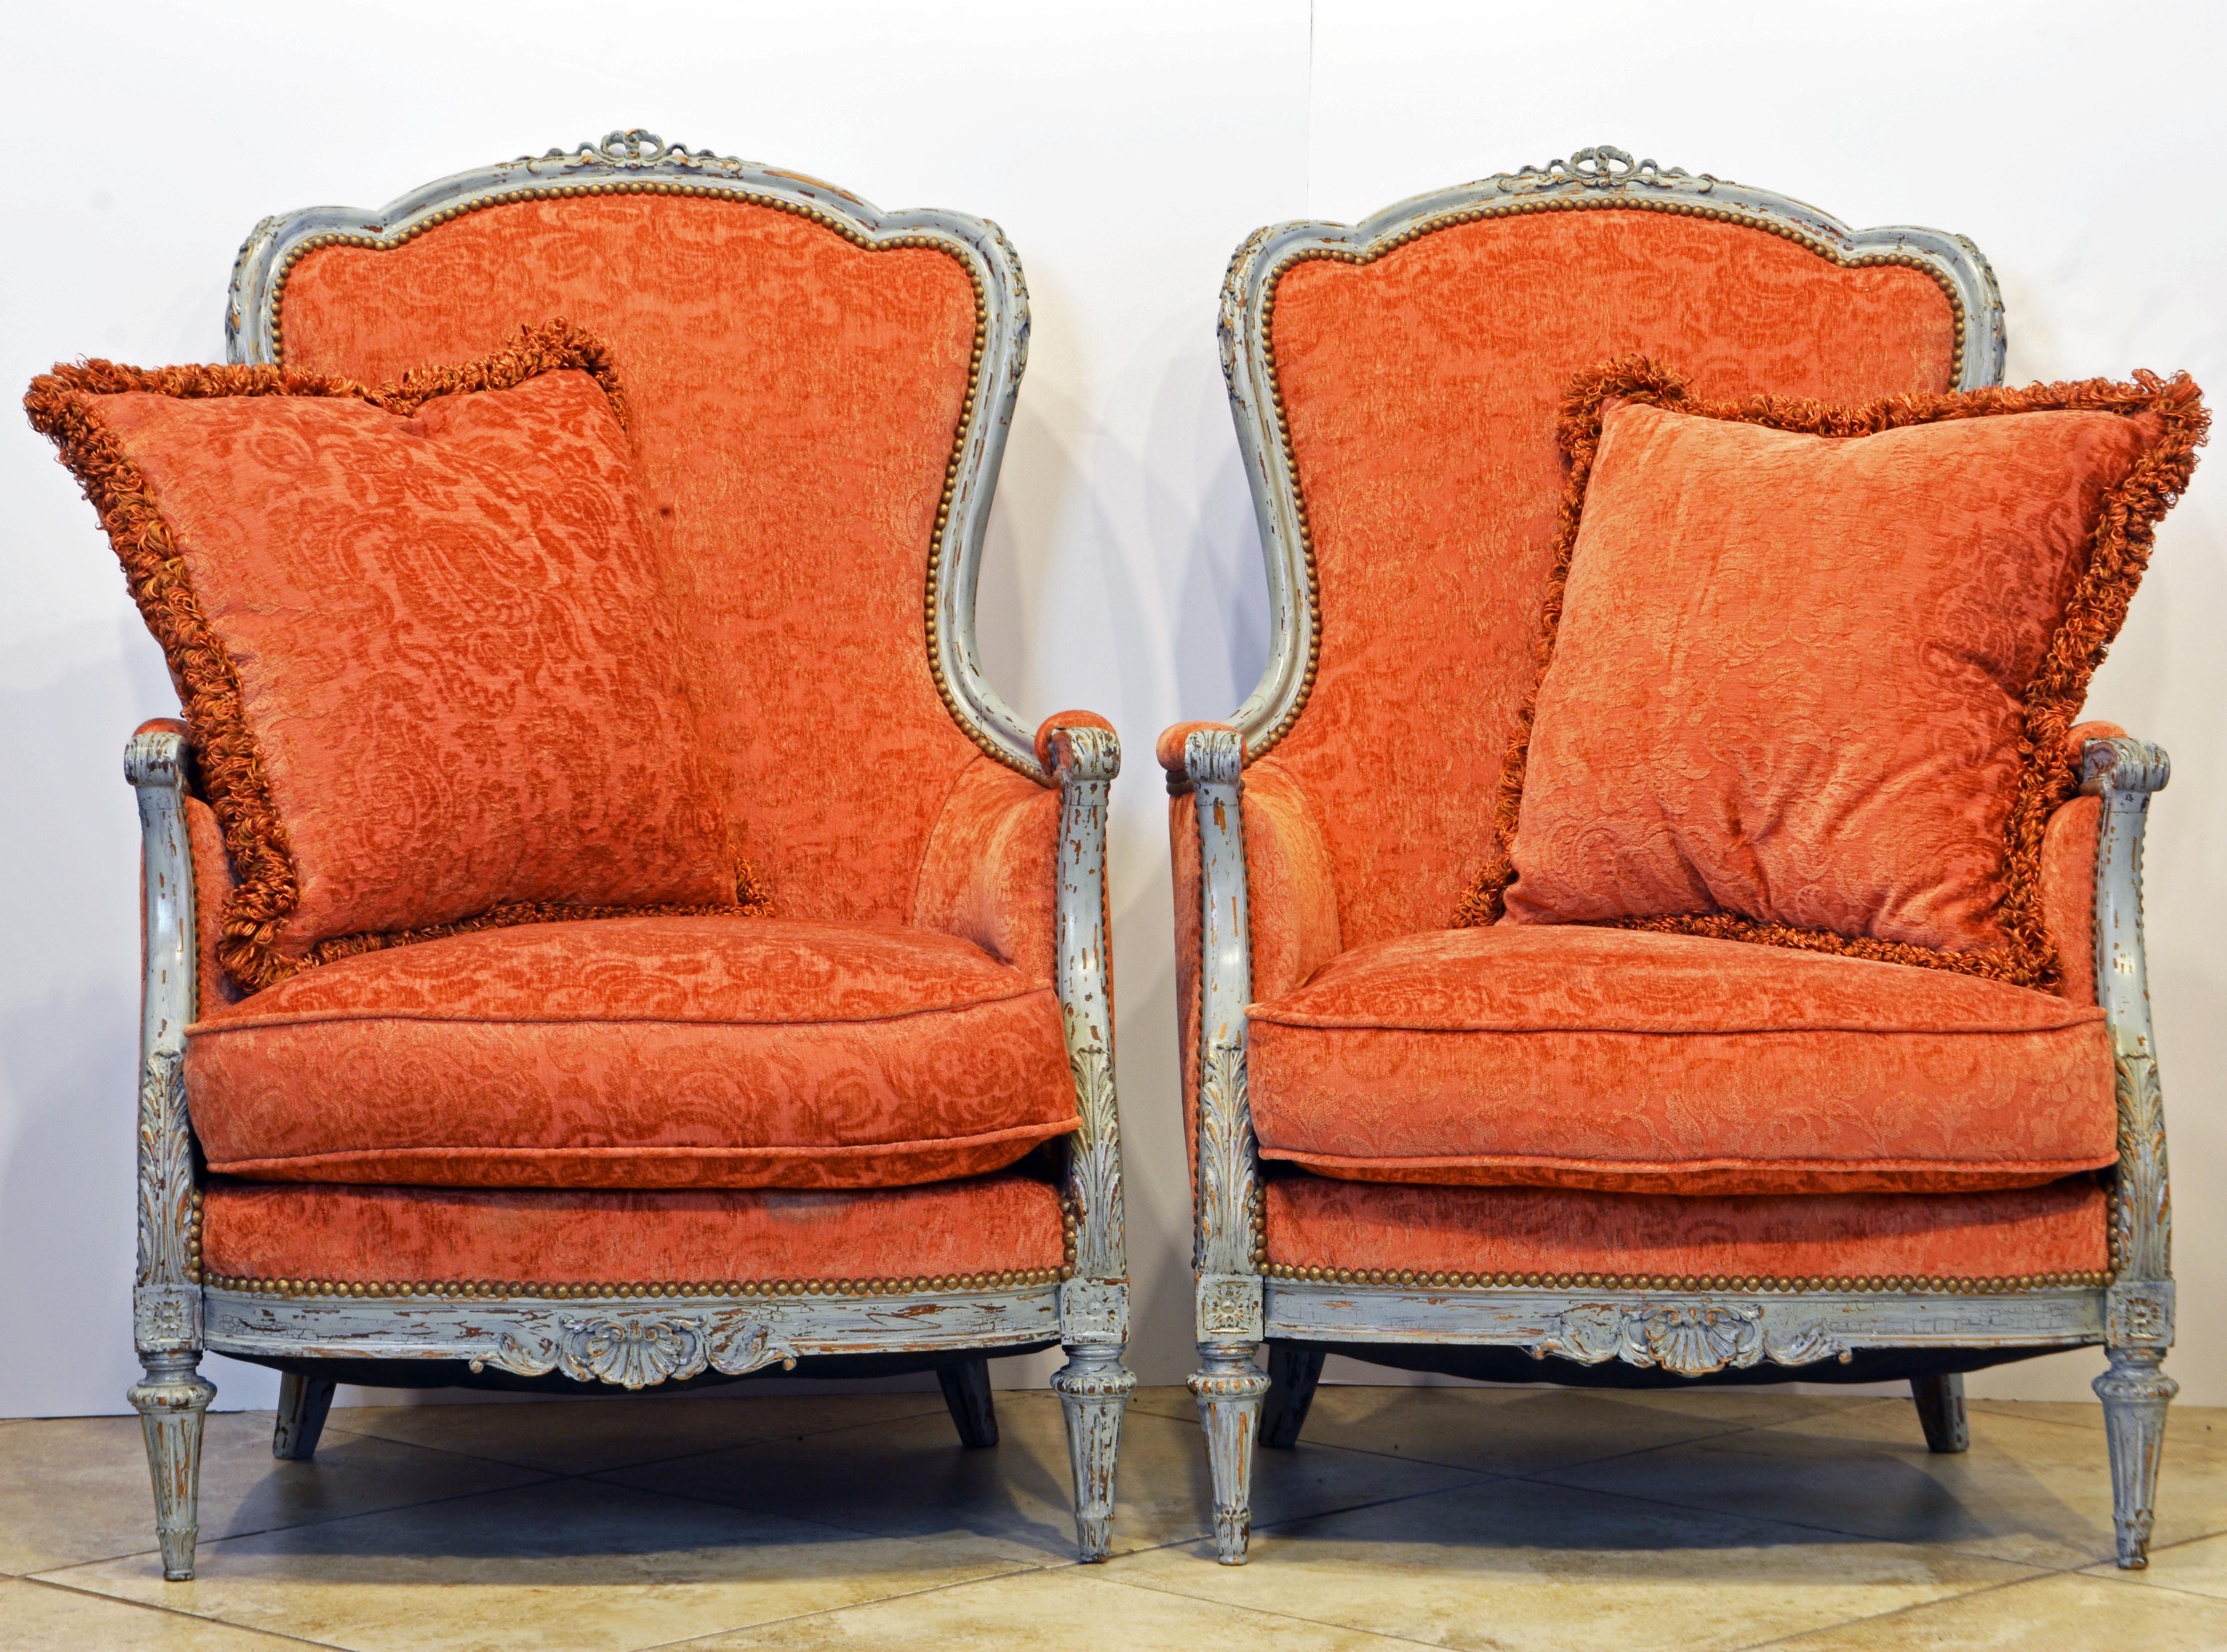 This elegant pair of French bergère chairs dating to the late 19th century (the Belle Époque period) feature upholstered backs and seats, closed sides with armrest pads and large pillows, circa 1880. The gray painted carved frames have romantic